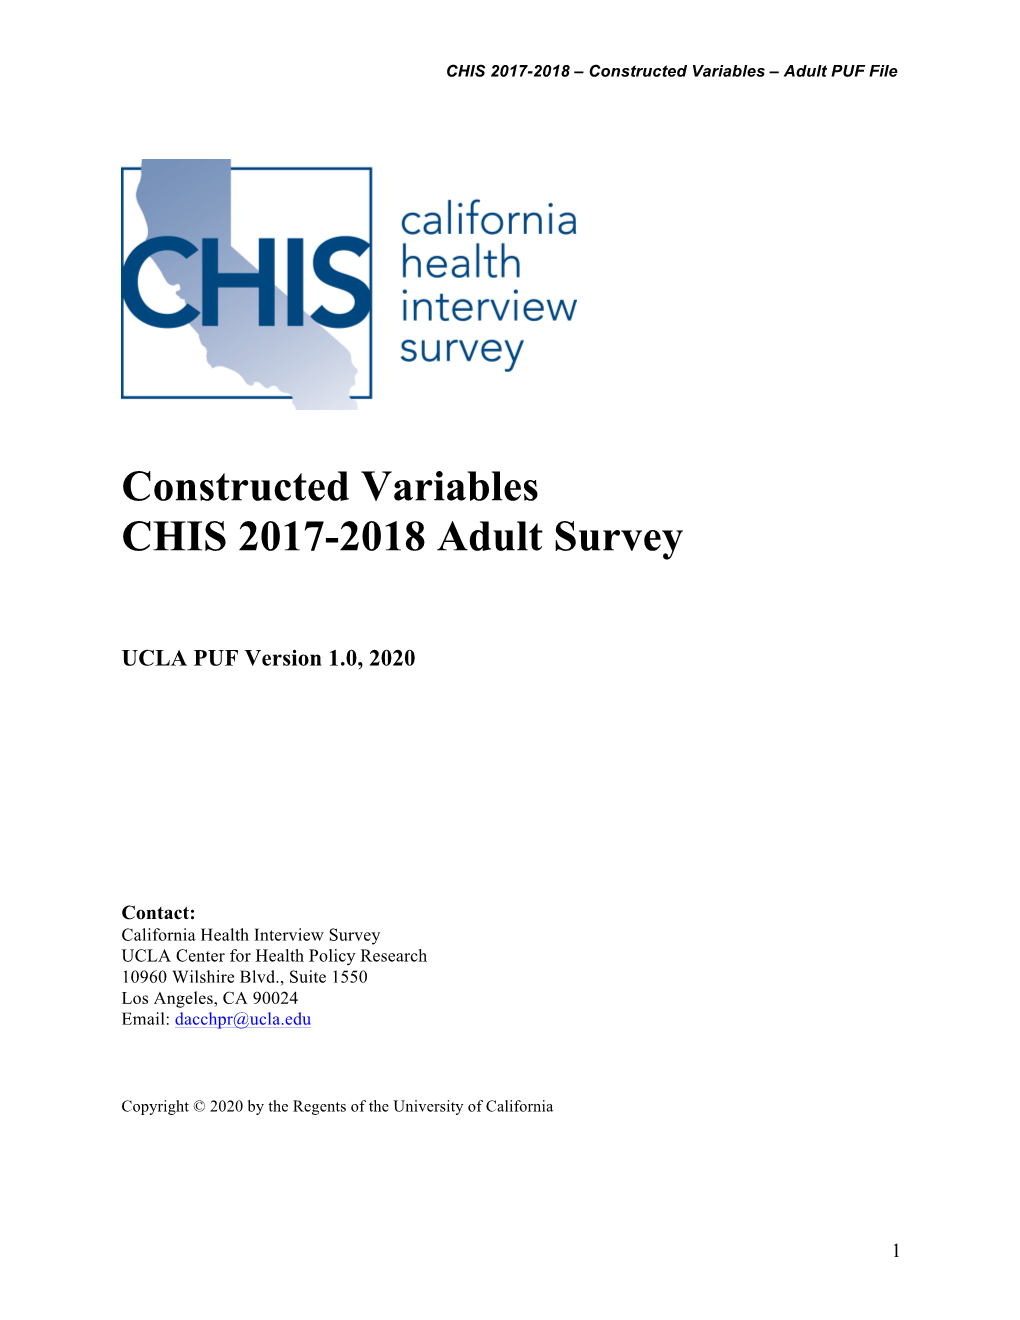 Constructed Variables CHIS 2017-2018 Adult Survey